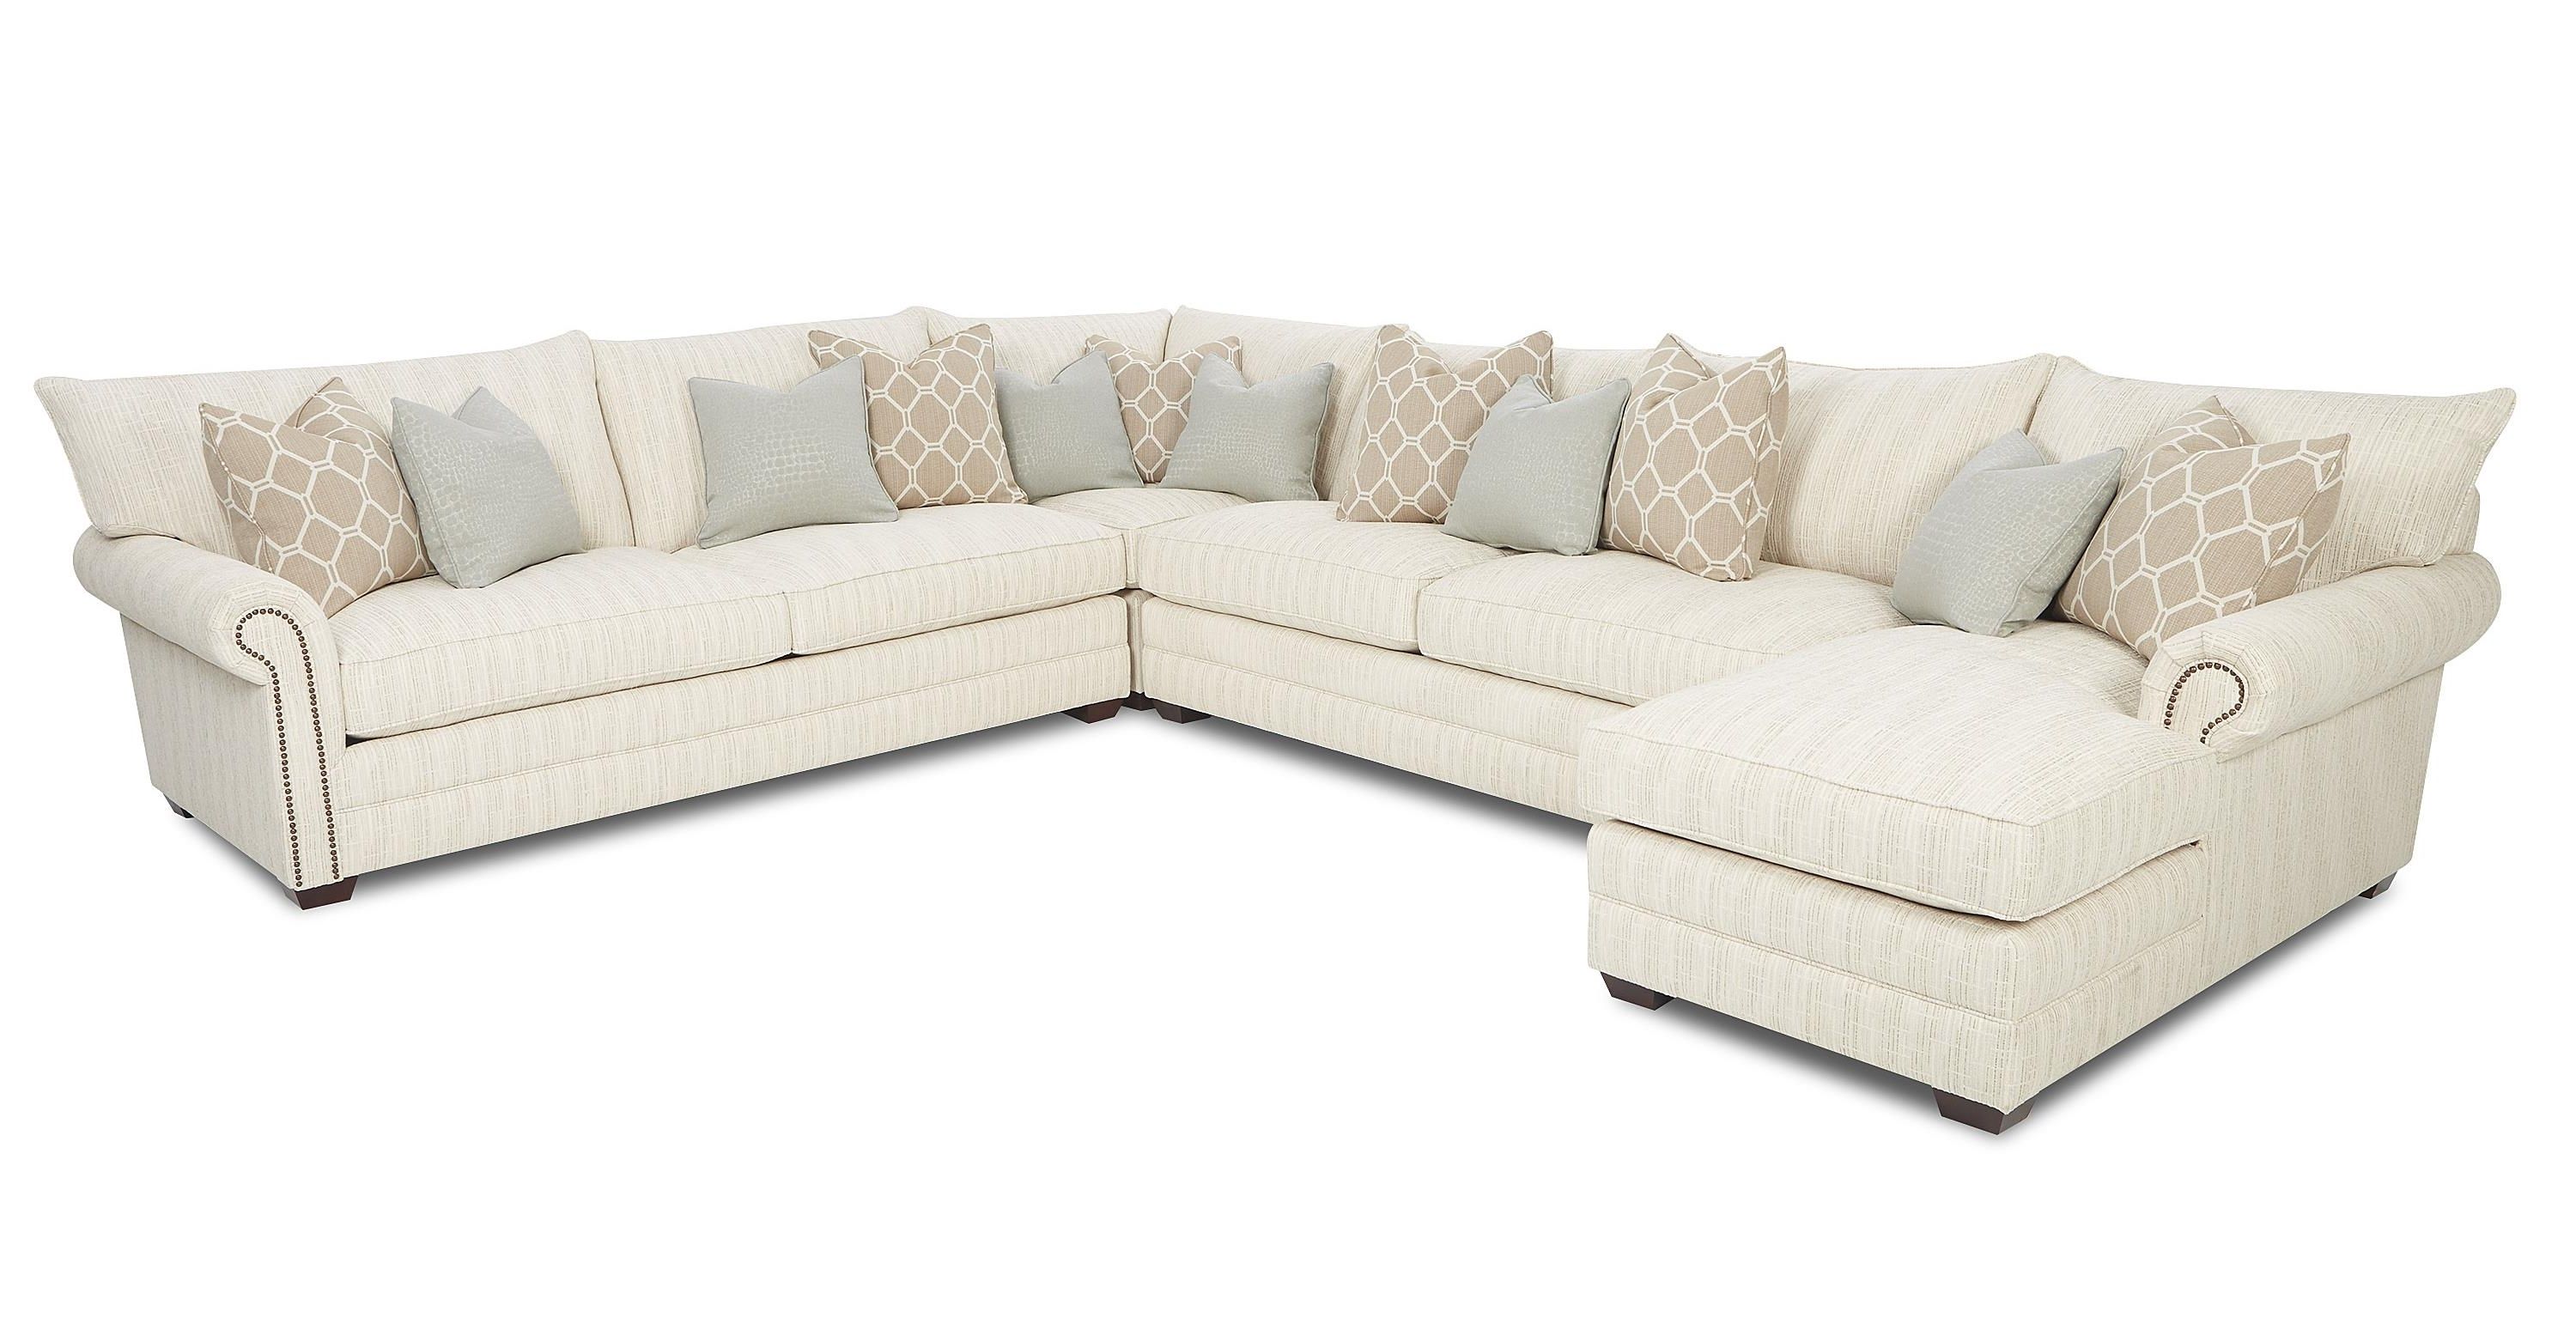 Sectional Sofas With Nailheads Regarding Current Traditional Sectional Sofa With Nailhead Trim And Chaise Lounge (View 1 of 20)